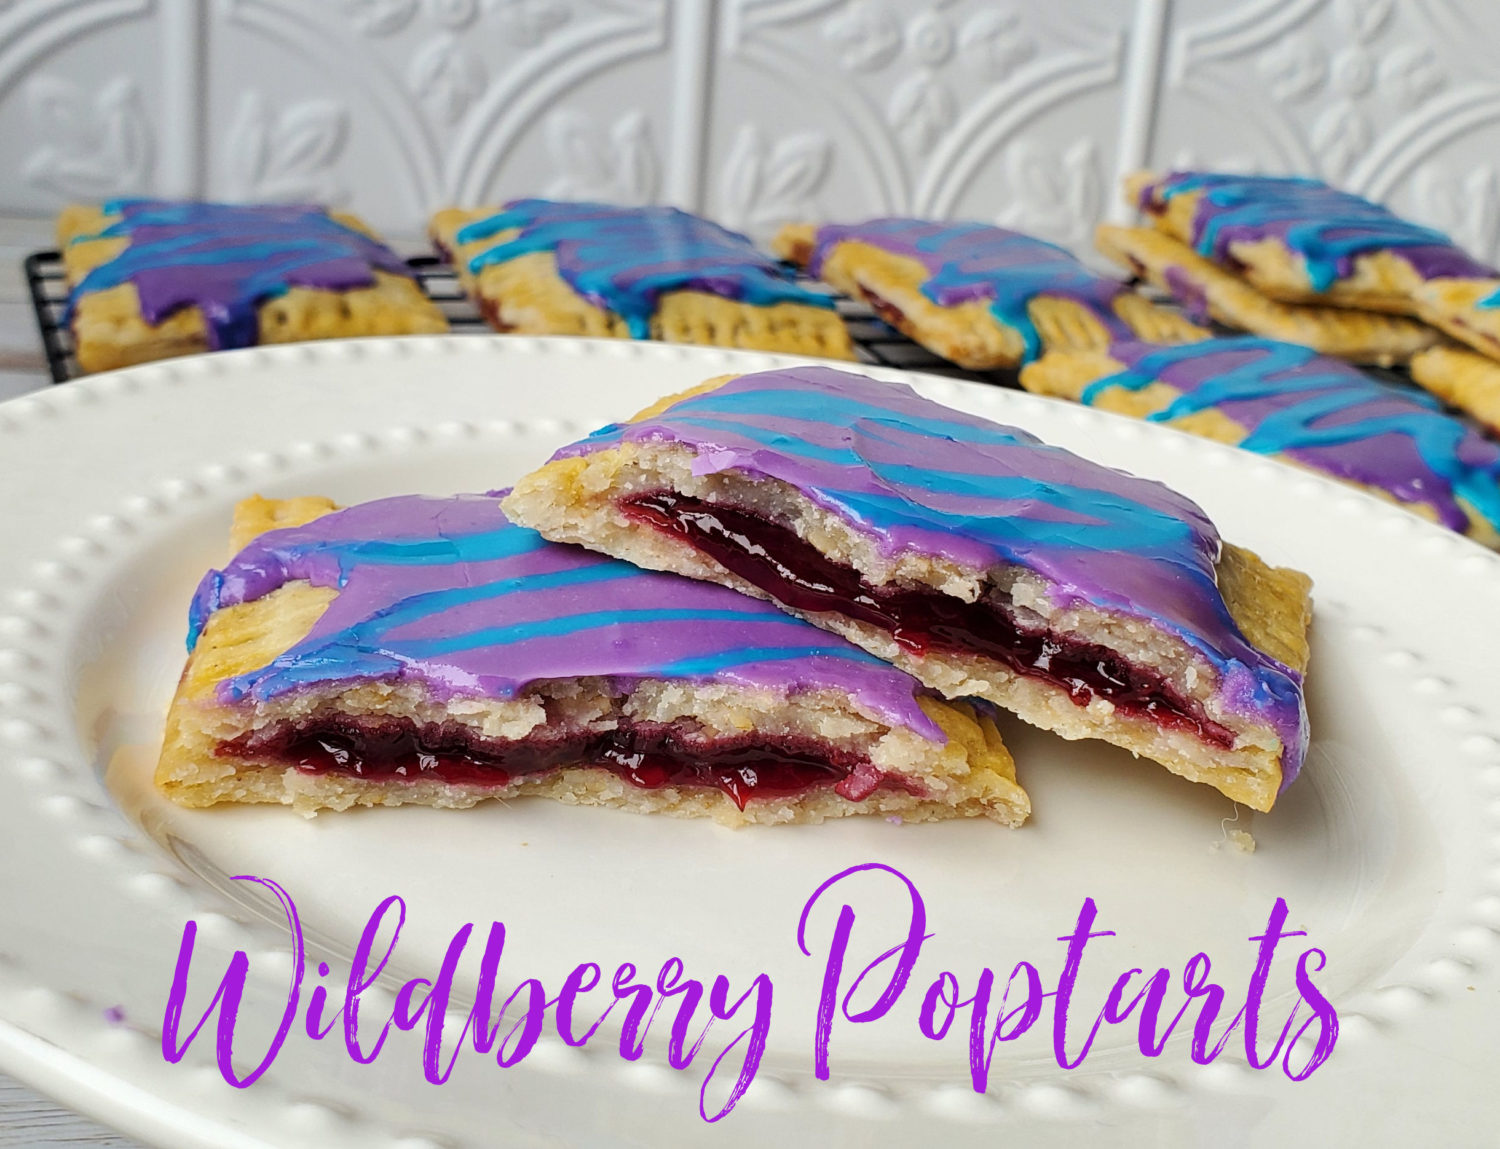 Wildberry Poptarts from your very own kitchen; buttery tender crust, homemade wildberry filling, and trademark violet & sky blue icing. 